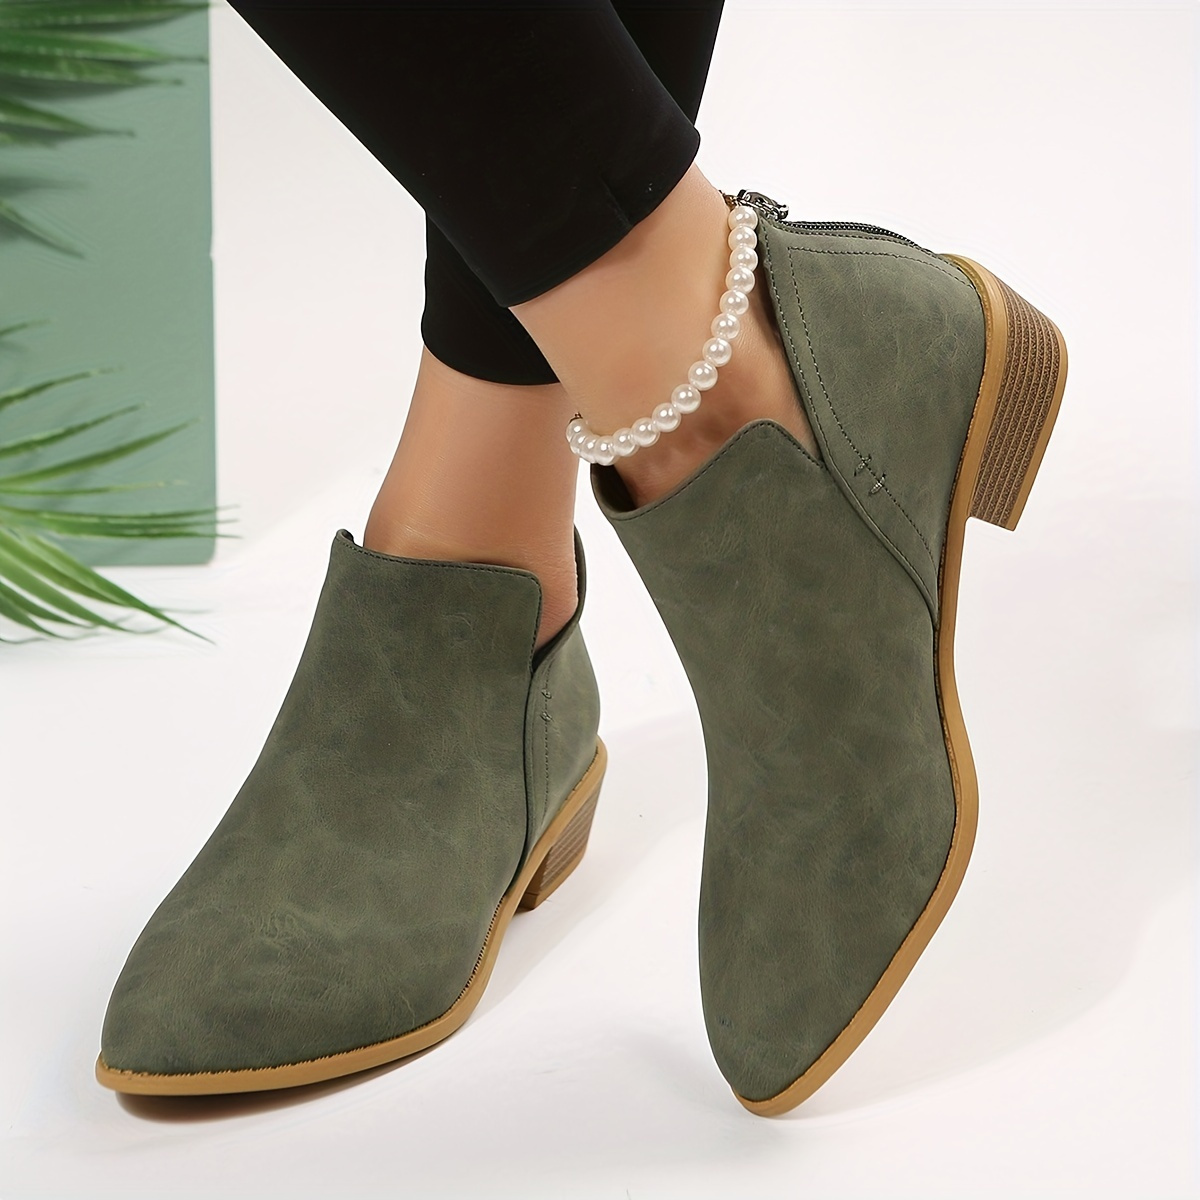 Women's Chunky Heeled Ankle Boots Pointed Toe Zipper Stacked